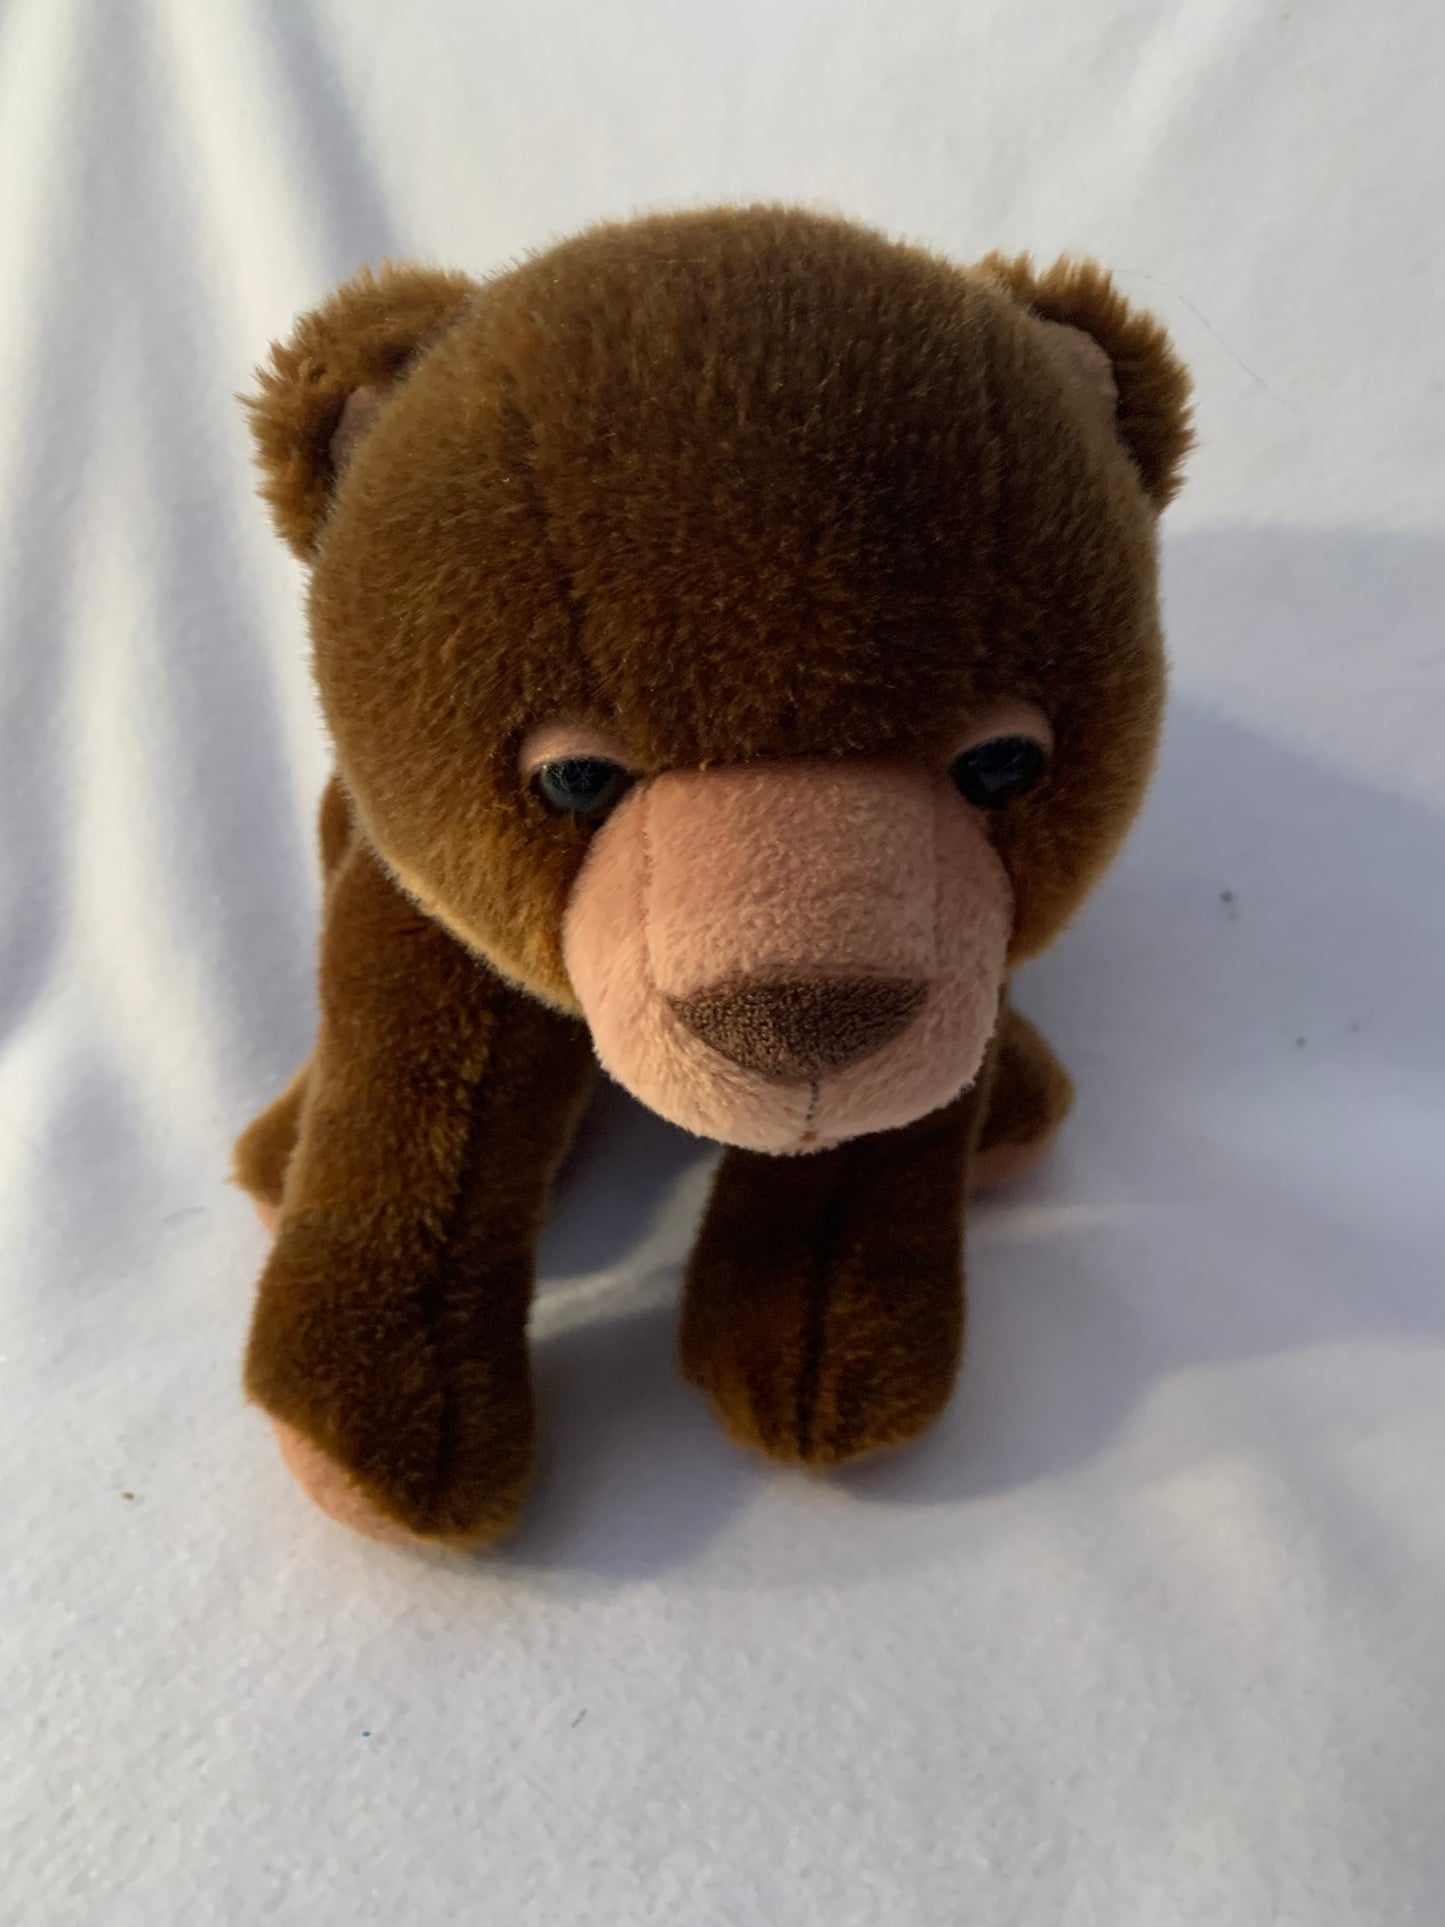 Weighted Stuffed Animal - Weighted Teddy Bear or Monkey with 4 lbs, washable plush buddy, brown bear